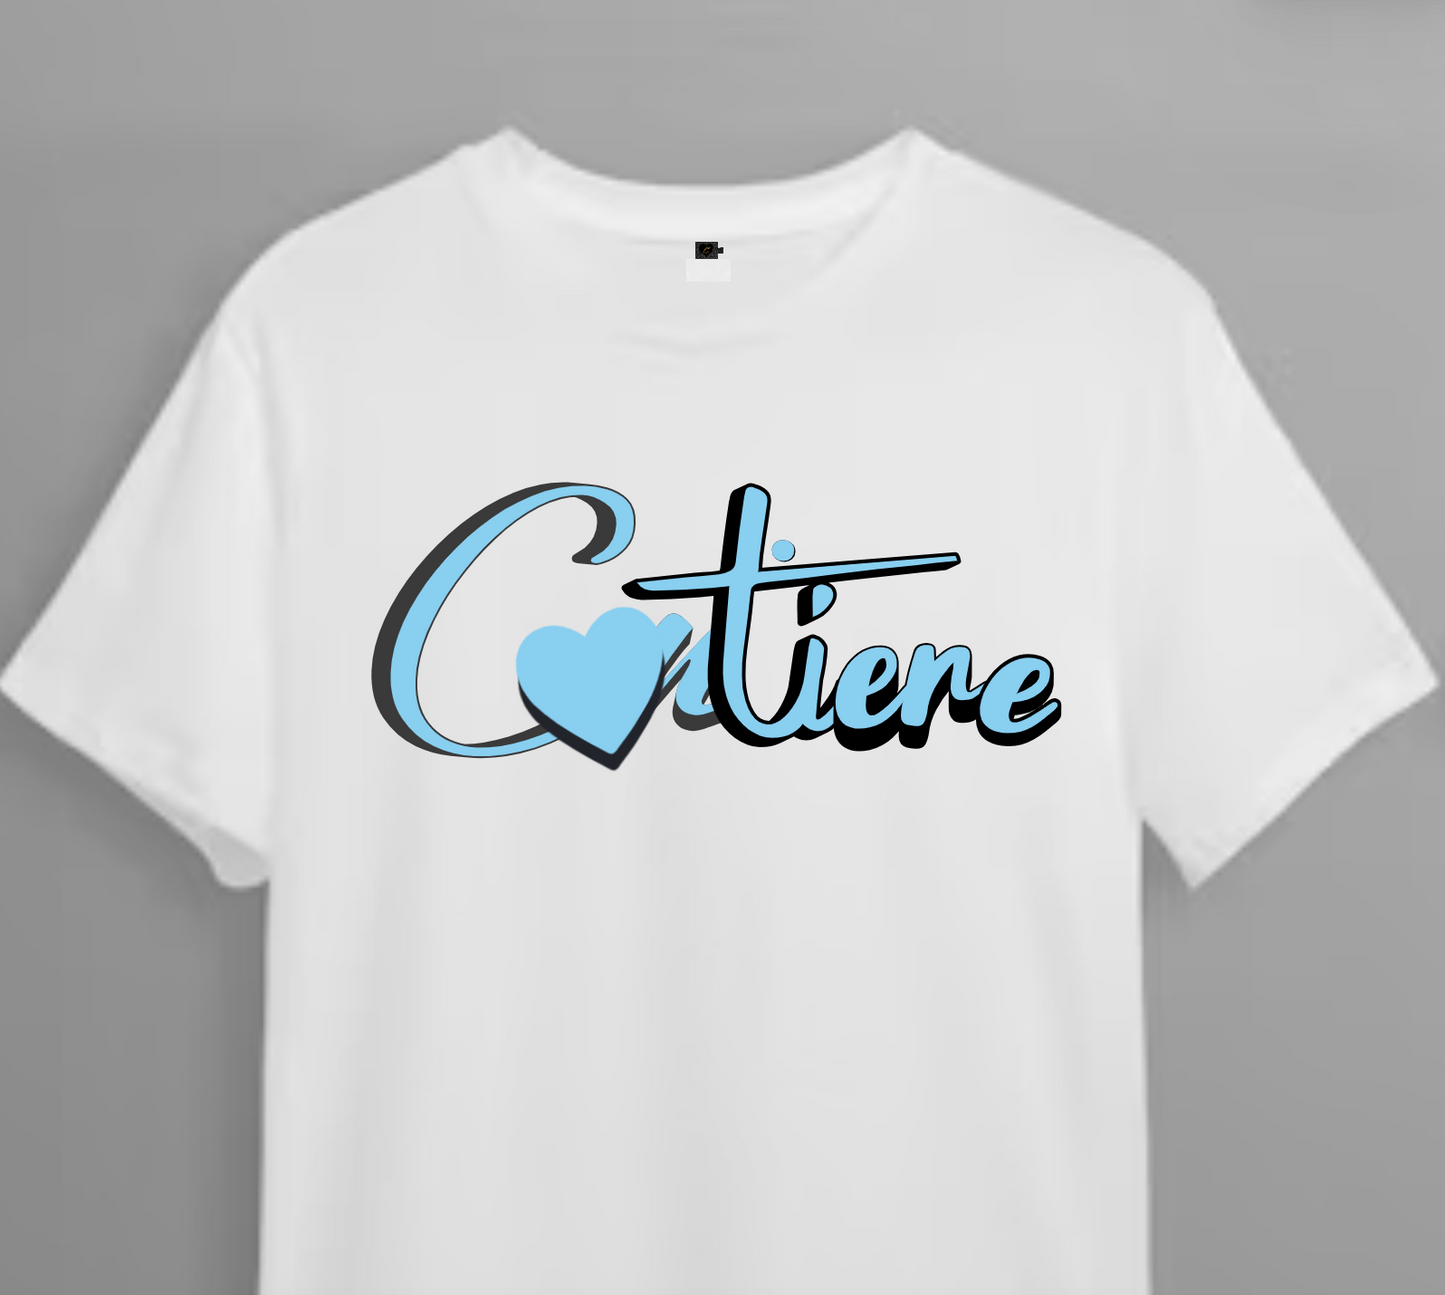 Cortieré T-Shirt White and Blue